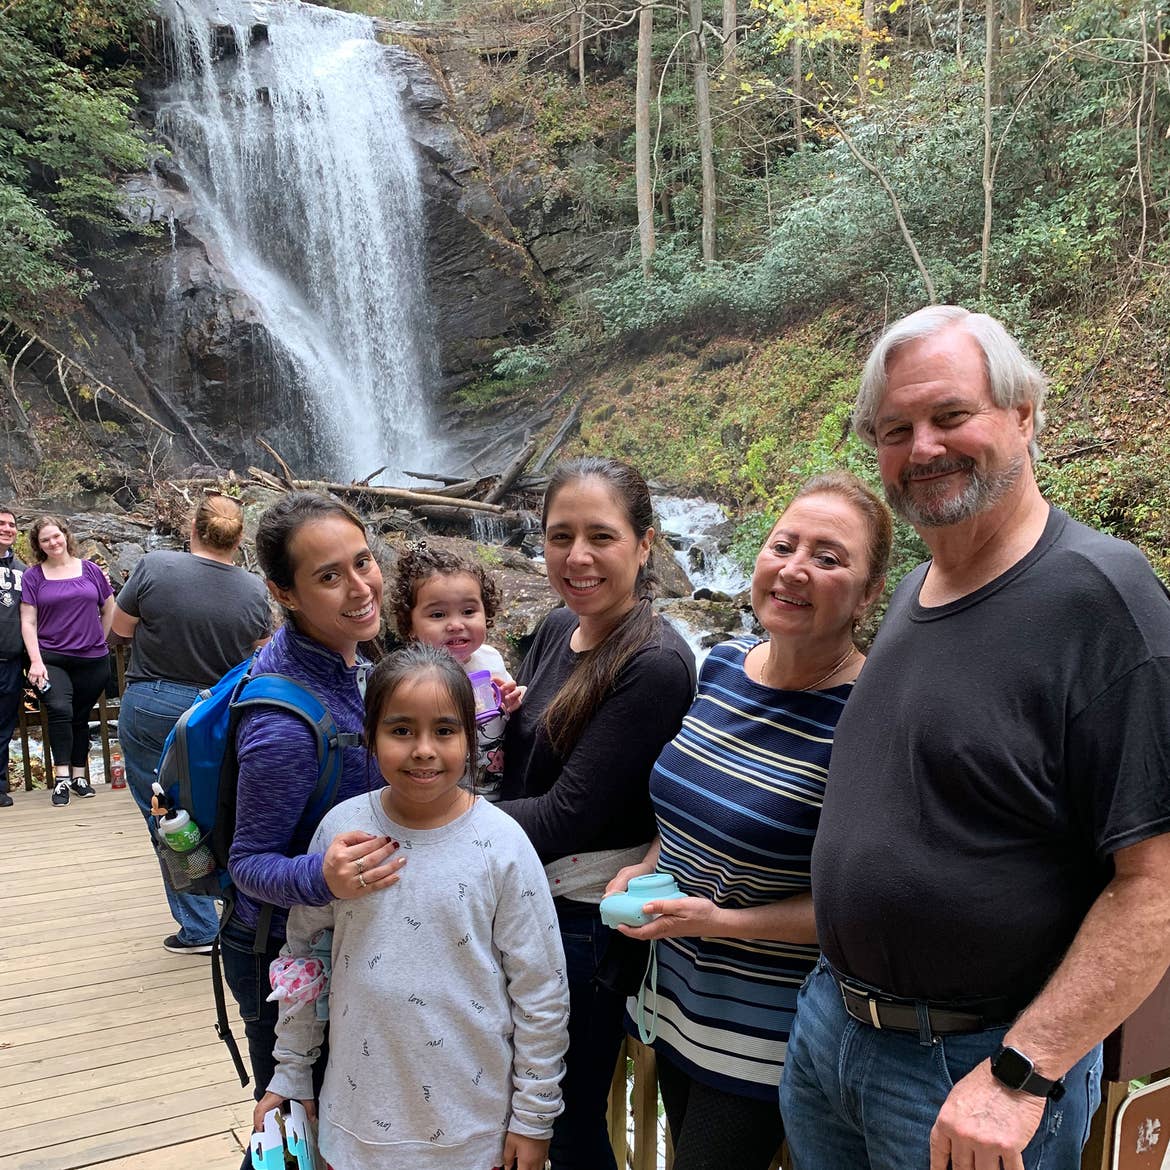 Featured author, Andrea Beltran (left), poses near a waterfall wearing a blue hiking backpack and purple pull-up sweater with her family.